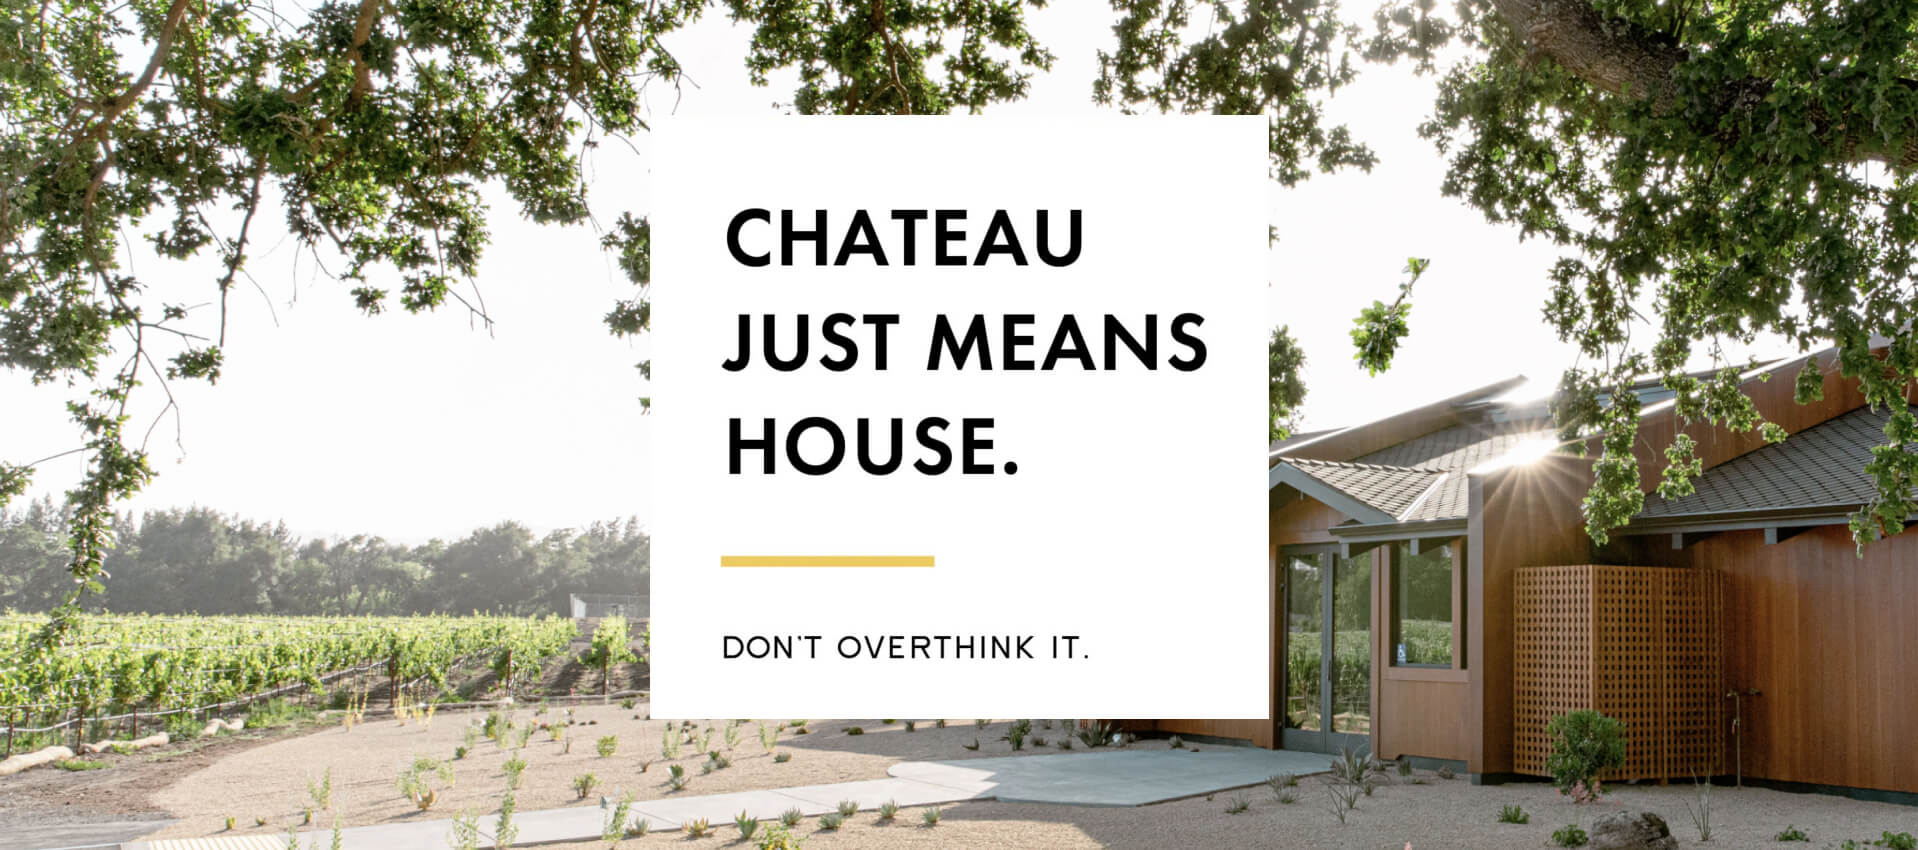 Background image of the Bread & Butter Tasting Room exterior in Napa with copy that says, "Chateau just means house. Don't overthink it."